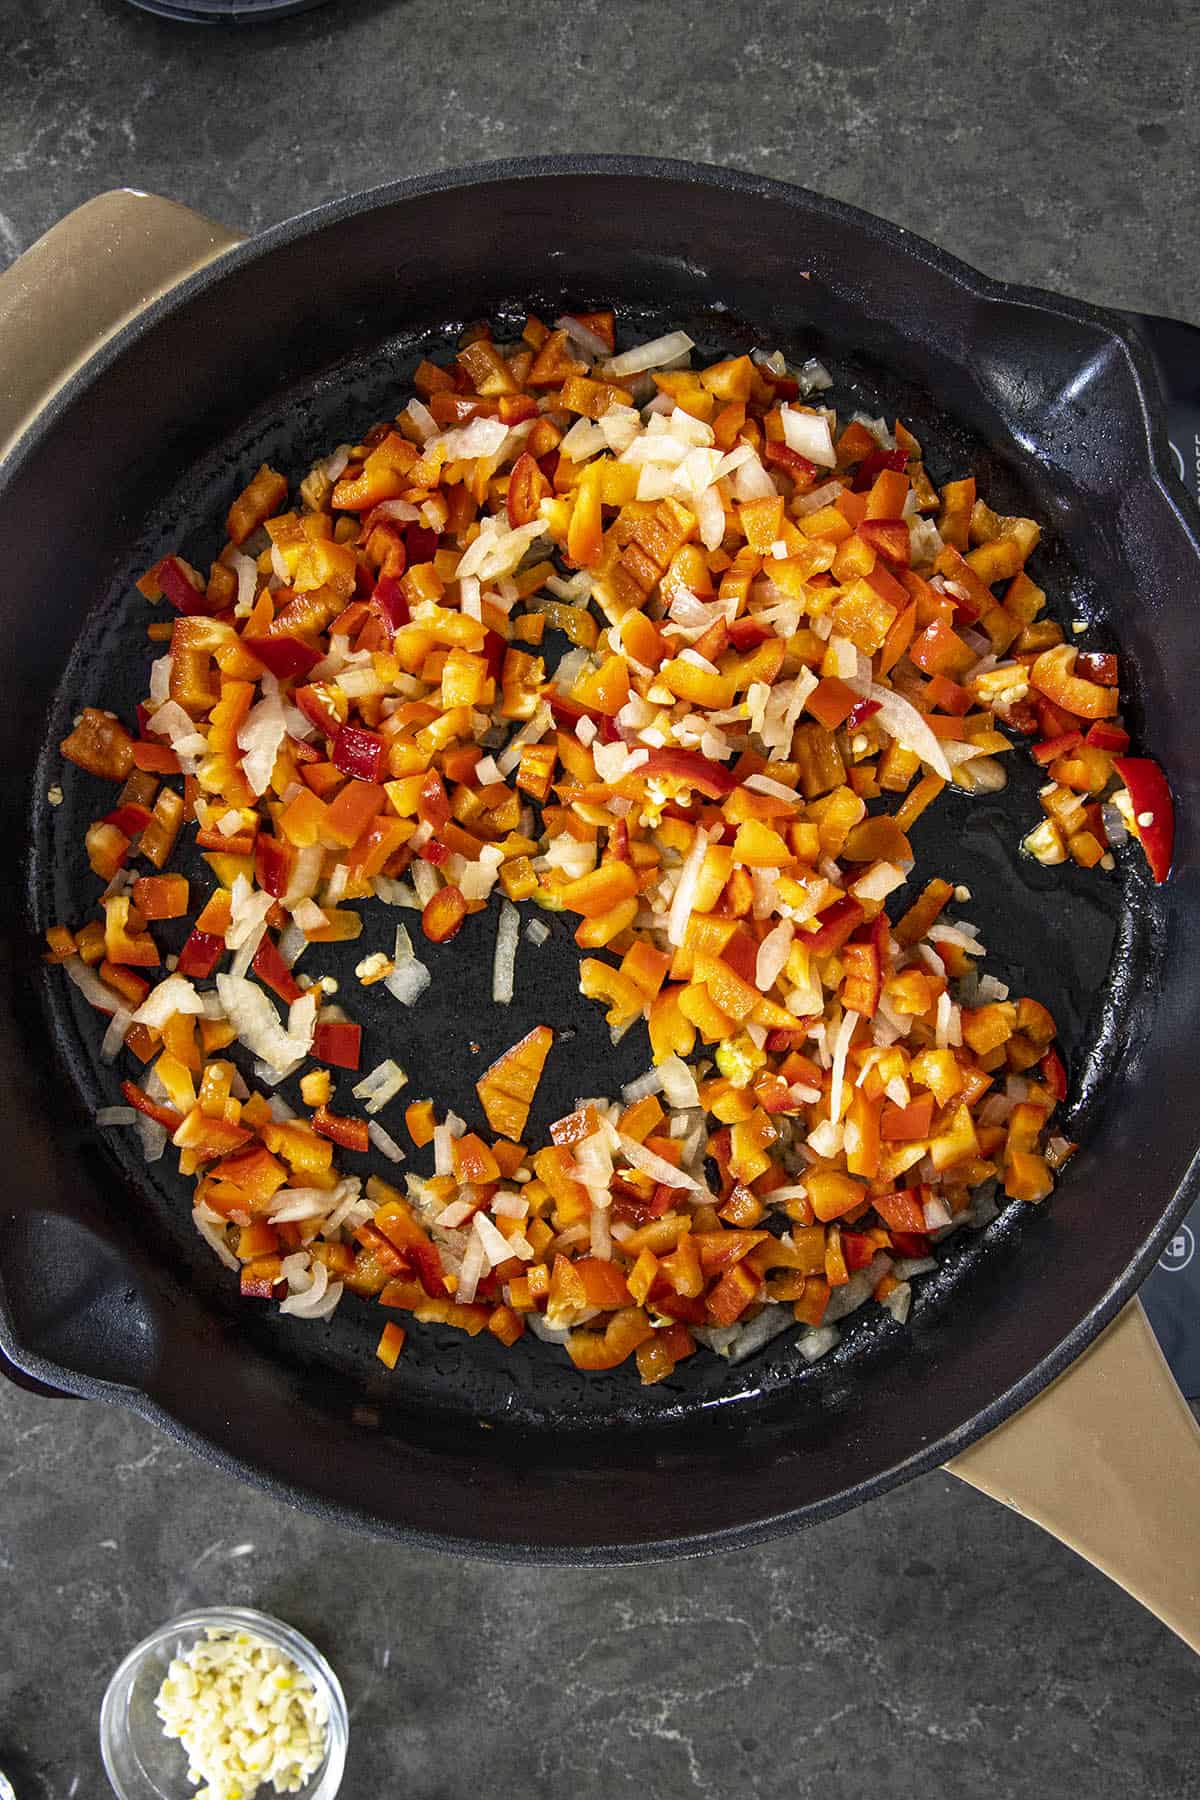 Cooking peppers and onions in a pan to make Menemen